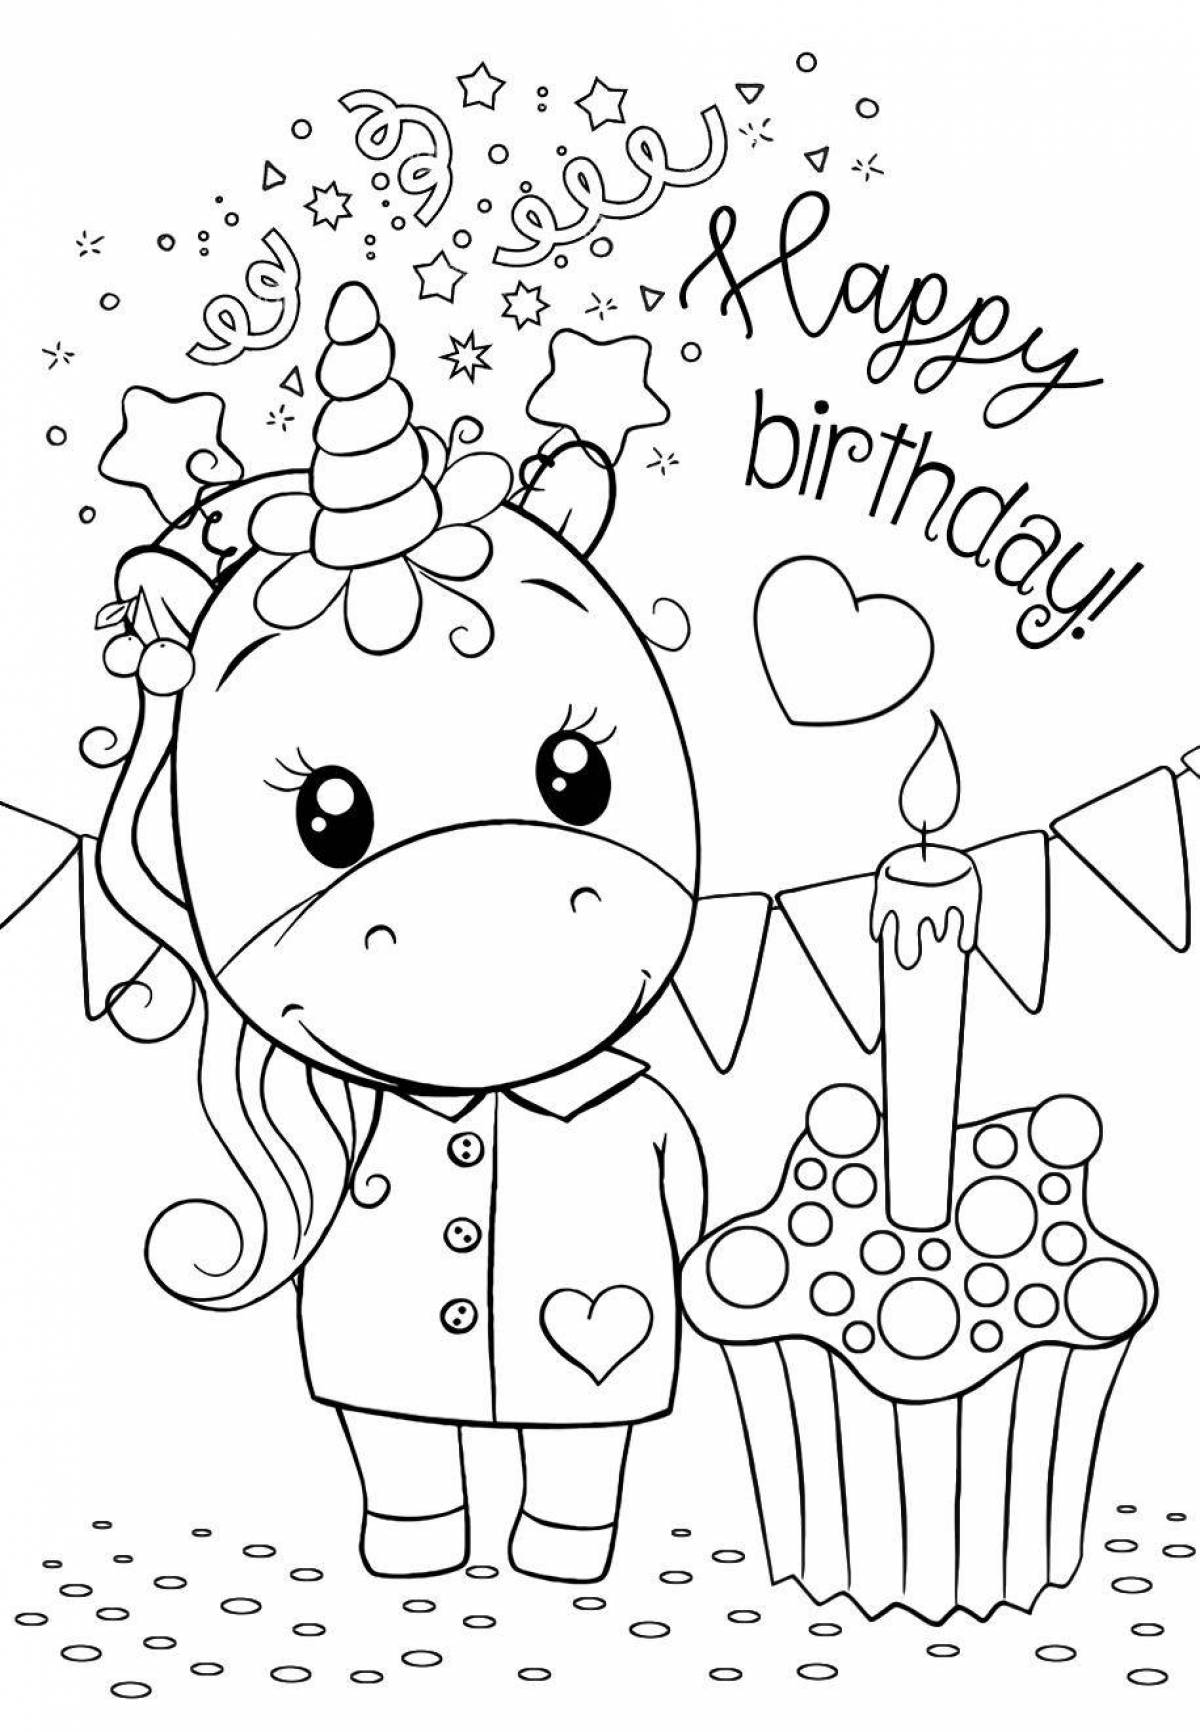 Color-frenzy sister happy birthday coloring page